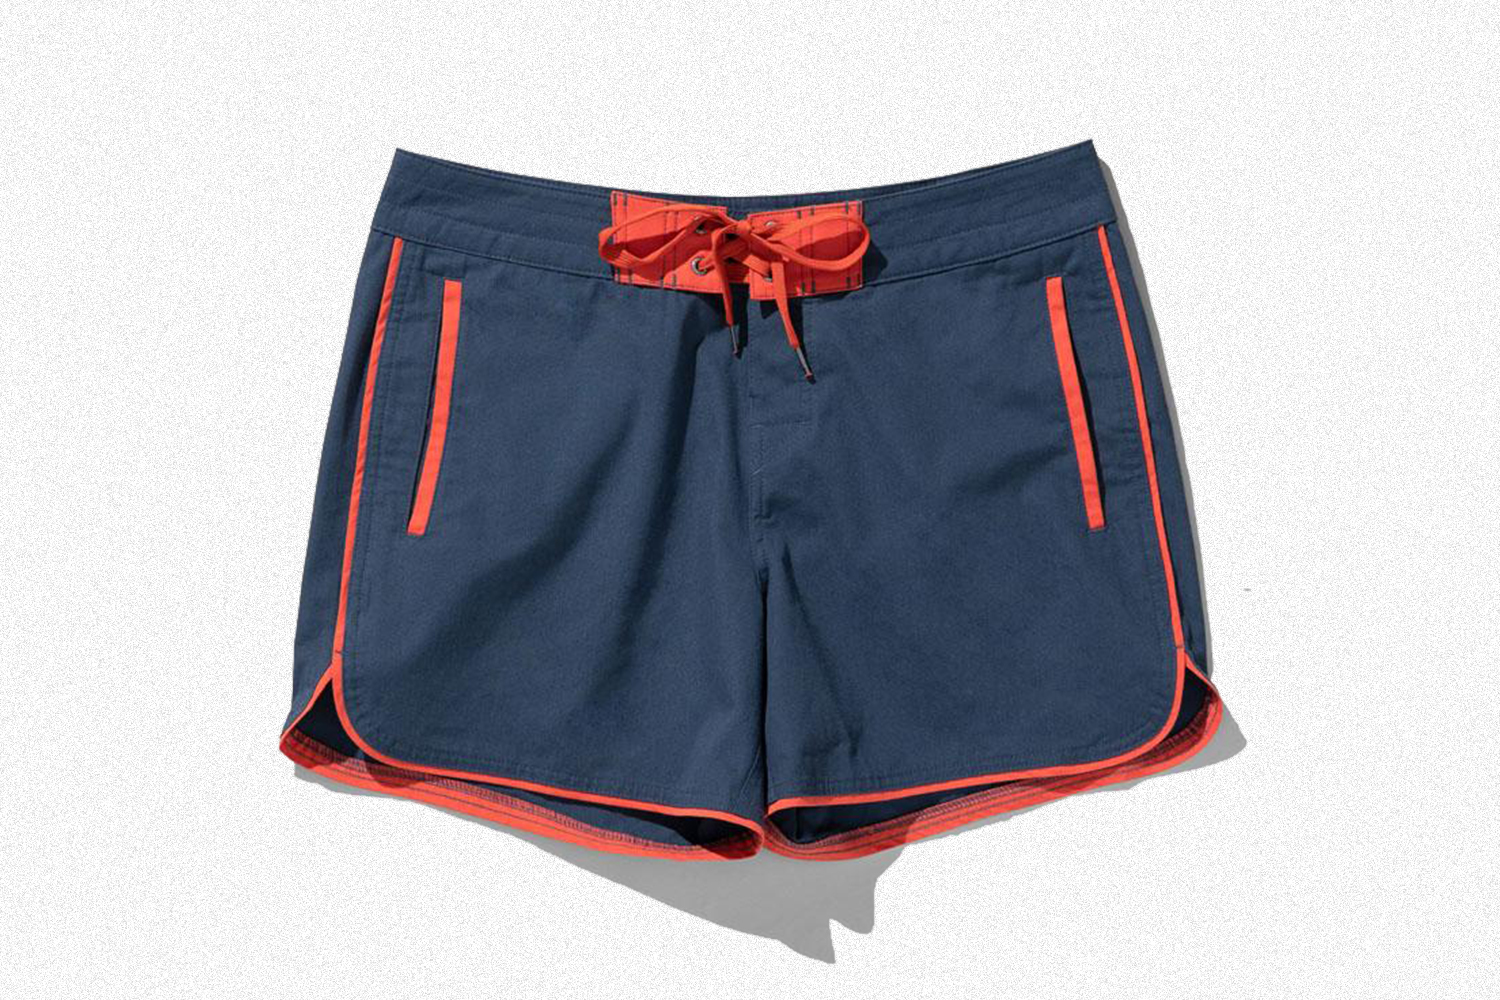 Organic cotton board shorts from United By Blue